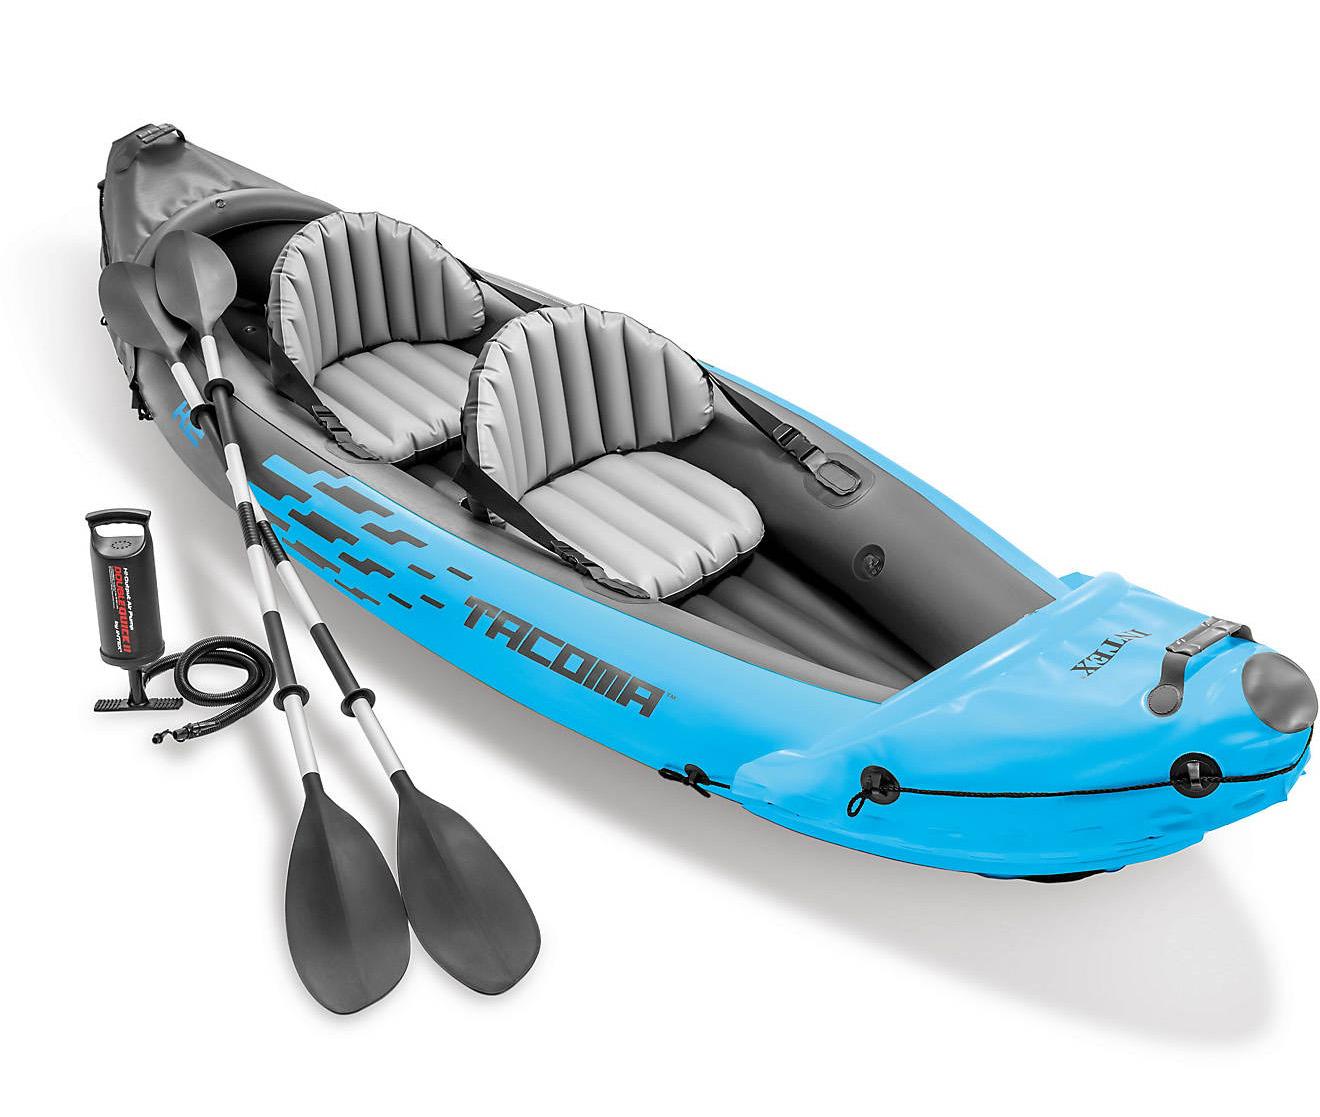 10ft Intex Tacoma K2 Inflatable Kayak with Oars for $99.99